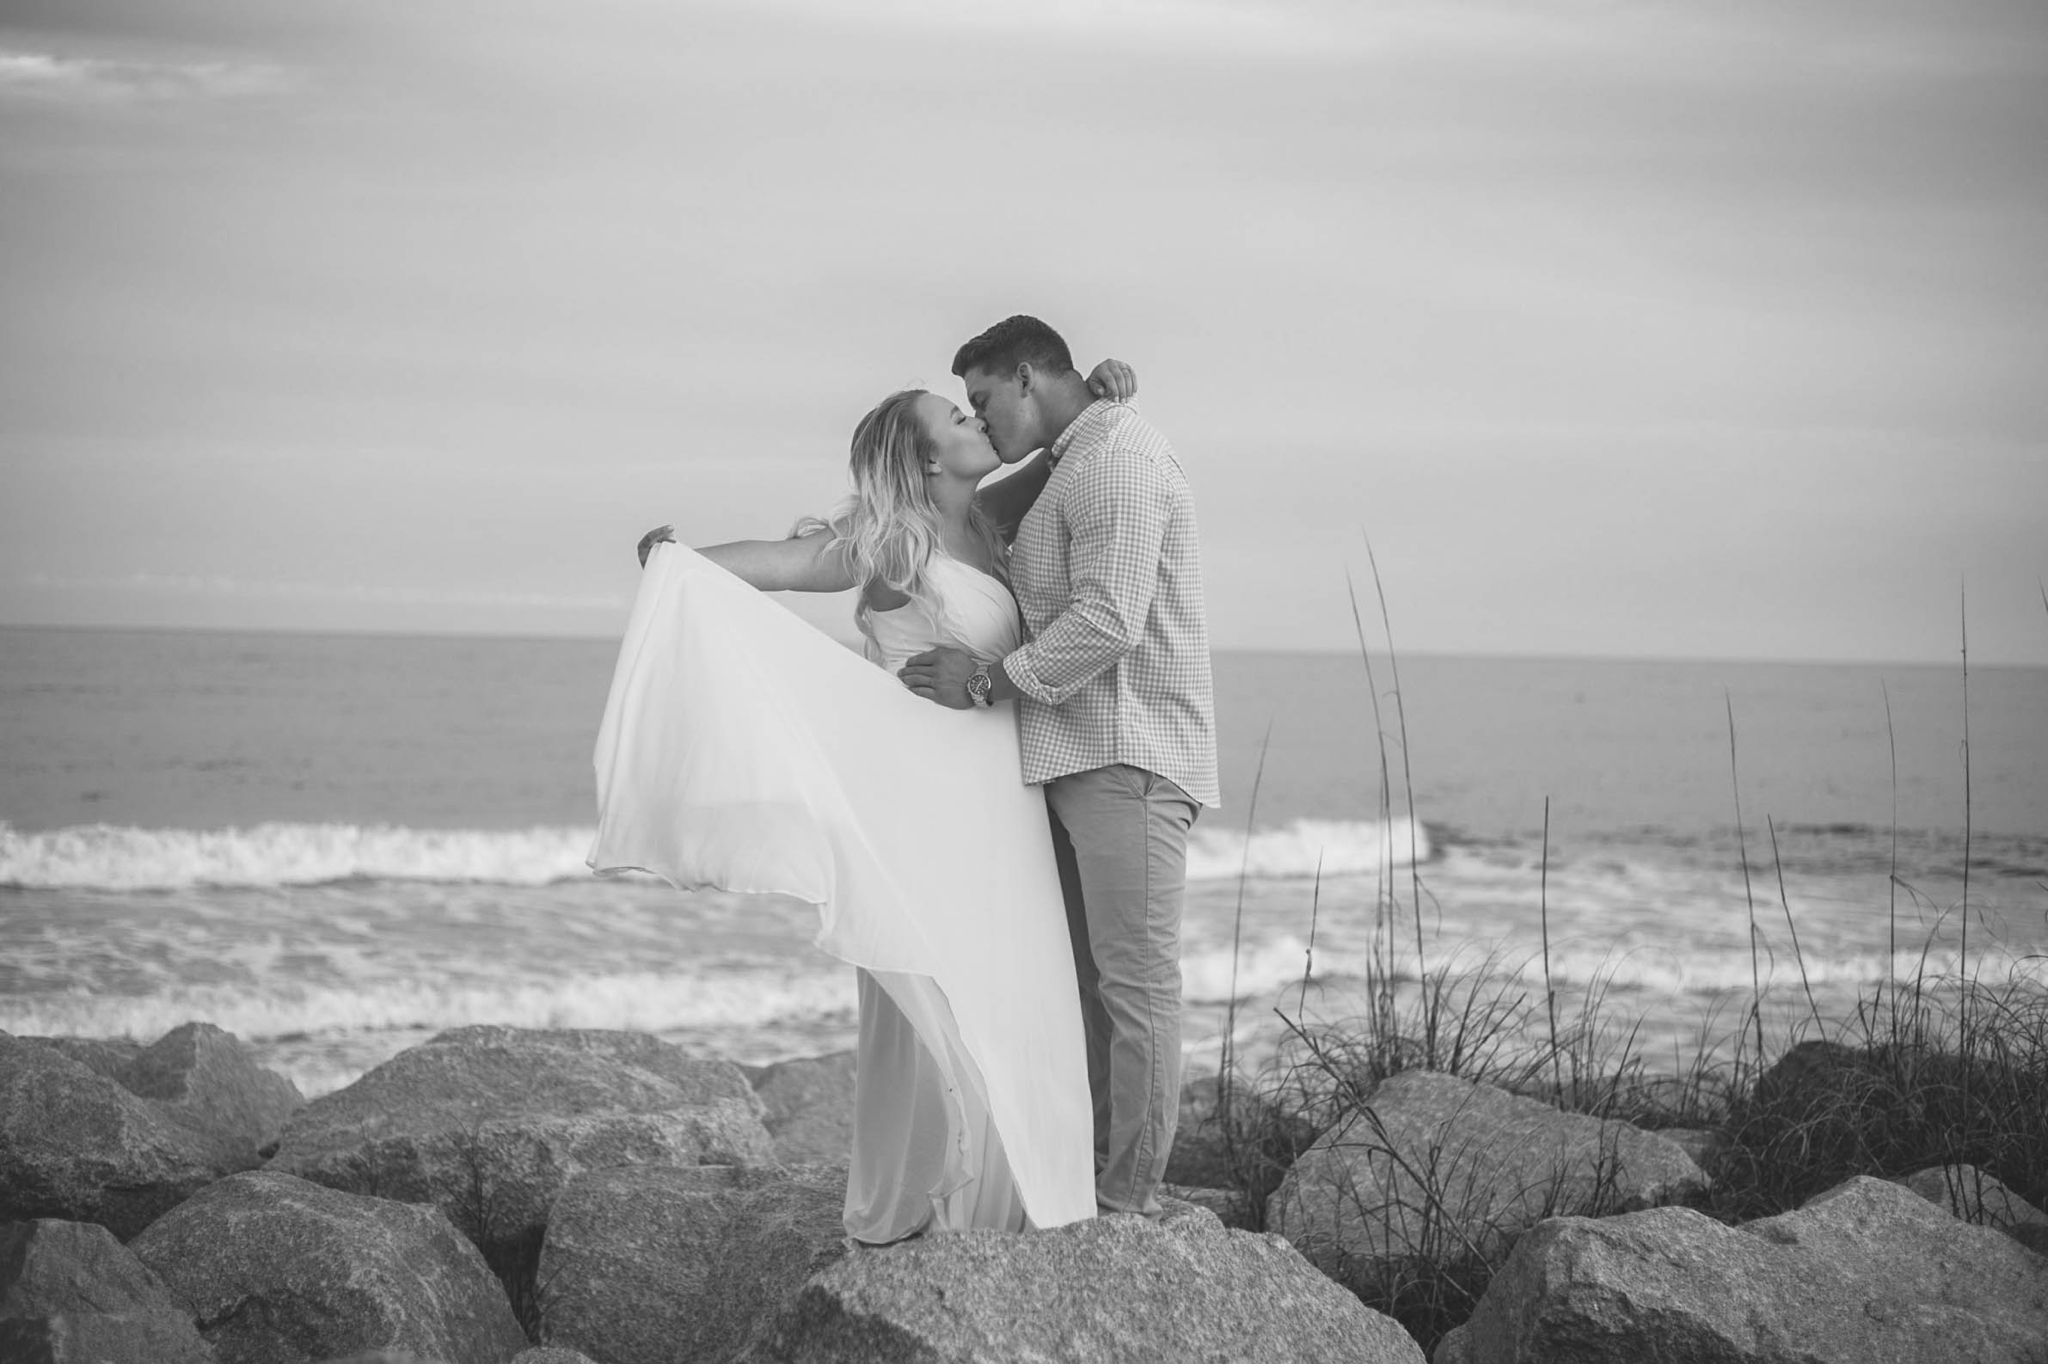  Black and White Engagement Photography Session at the beach on top of rocks  - couple is kissing - girl is wearing a white flowy maxi dress from lulus - Honolulu Oahu Hawaii Wedding Photographer - Johanna Dye 